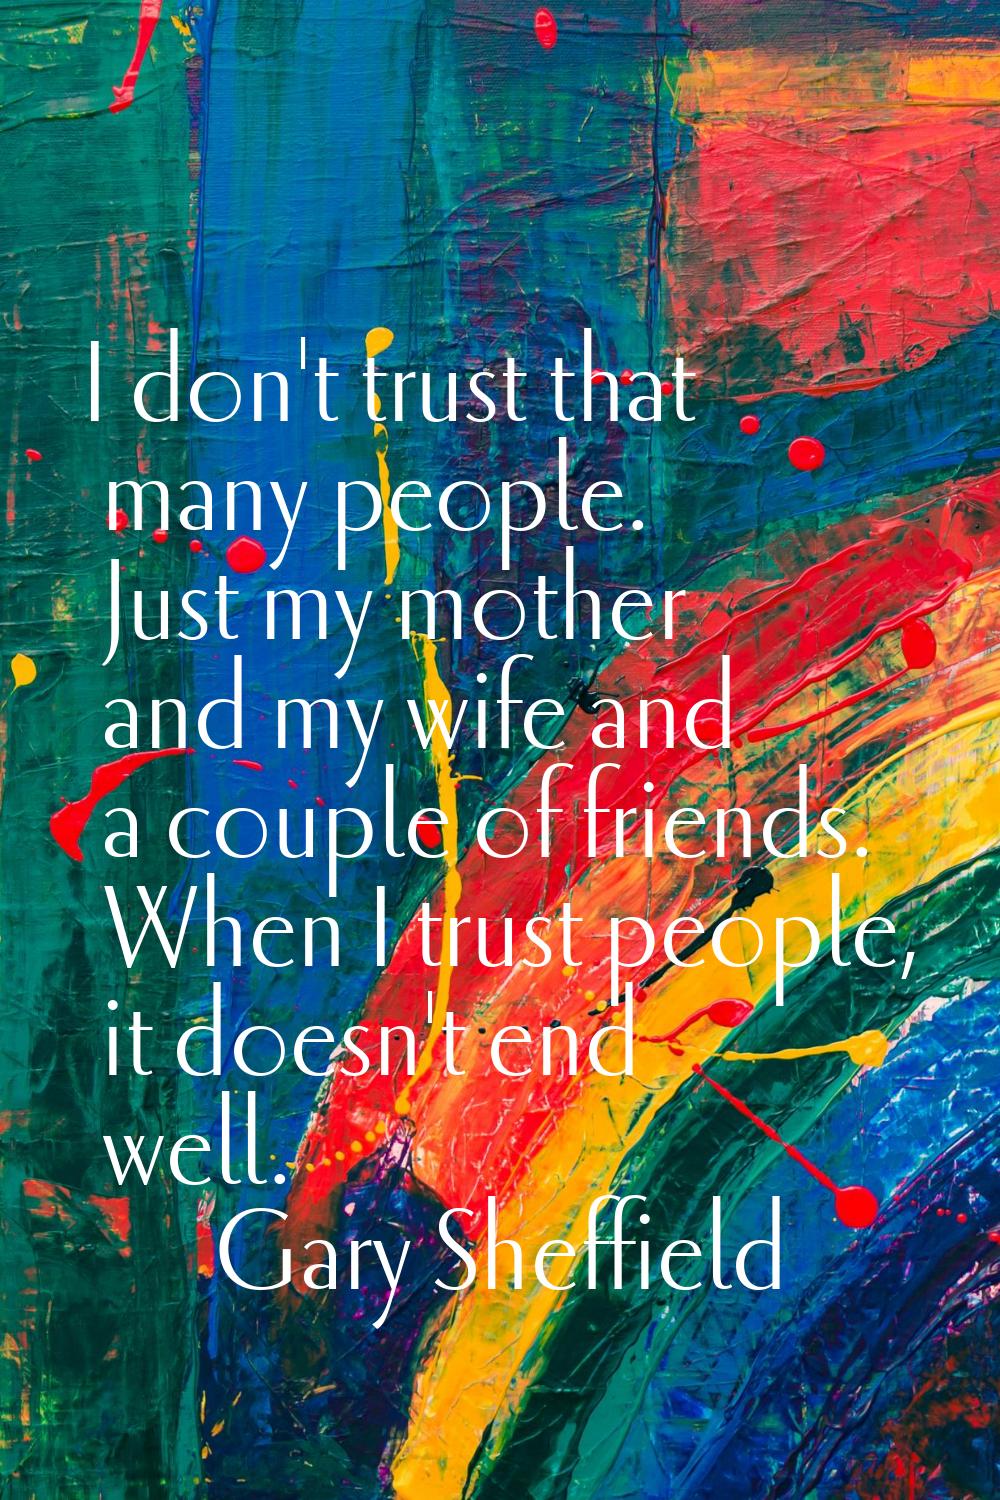 I don't trust that many people. Just my mother and my wife and a couple of friends. When I trust pe